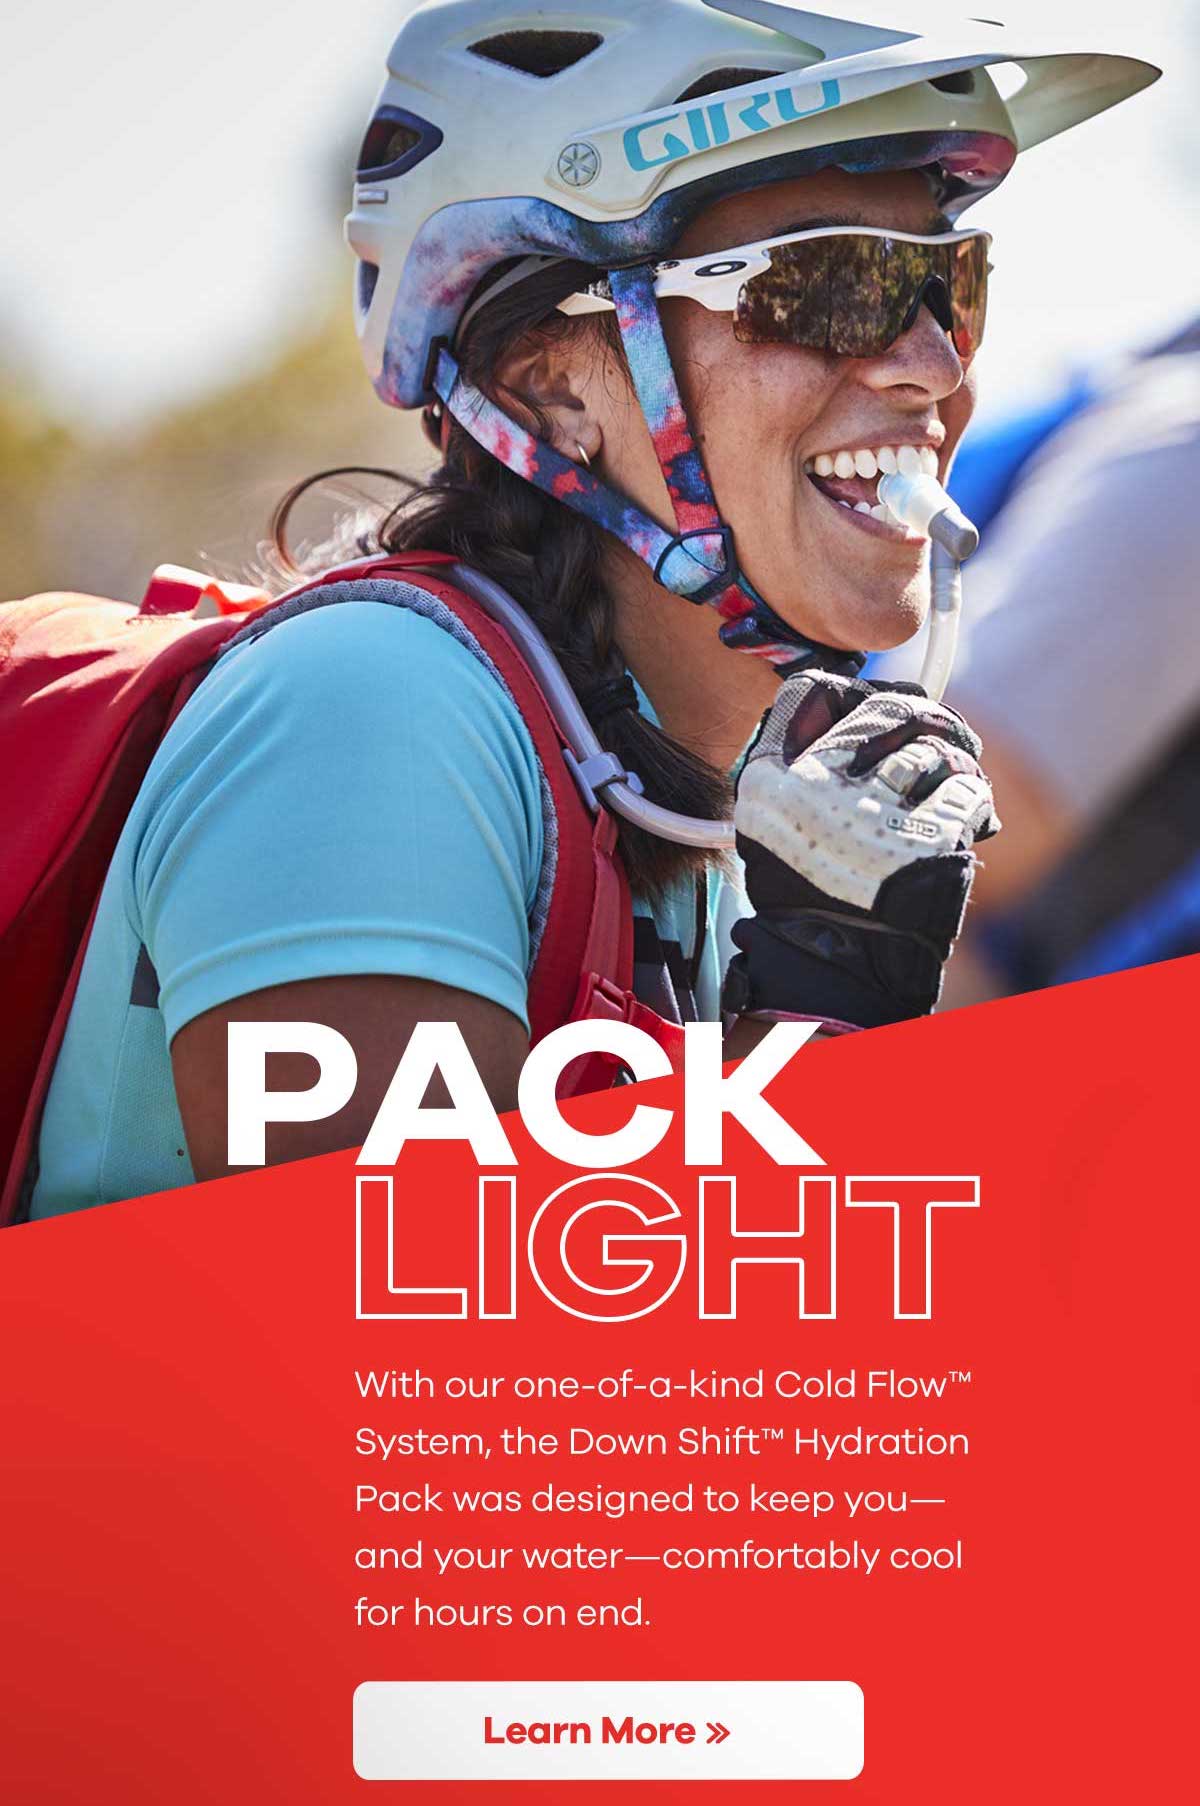 PACK LIGHT - With our one-of-a-kind Cold FlowT System, the Down ShiftT Hydration Pack was designed to keep you-and your water-comfortably cool for hours on end. | Learn More >>